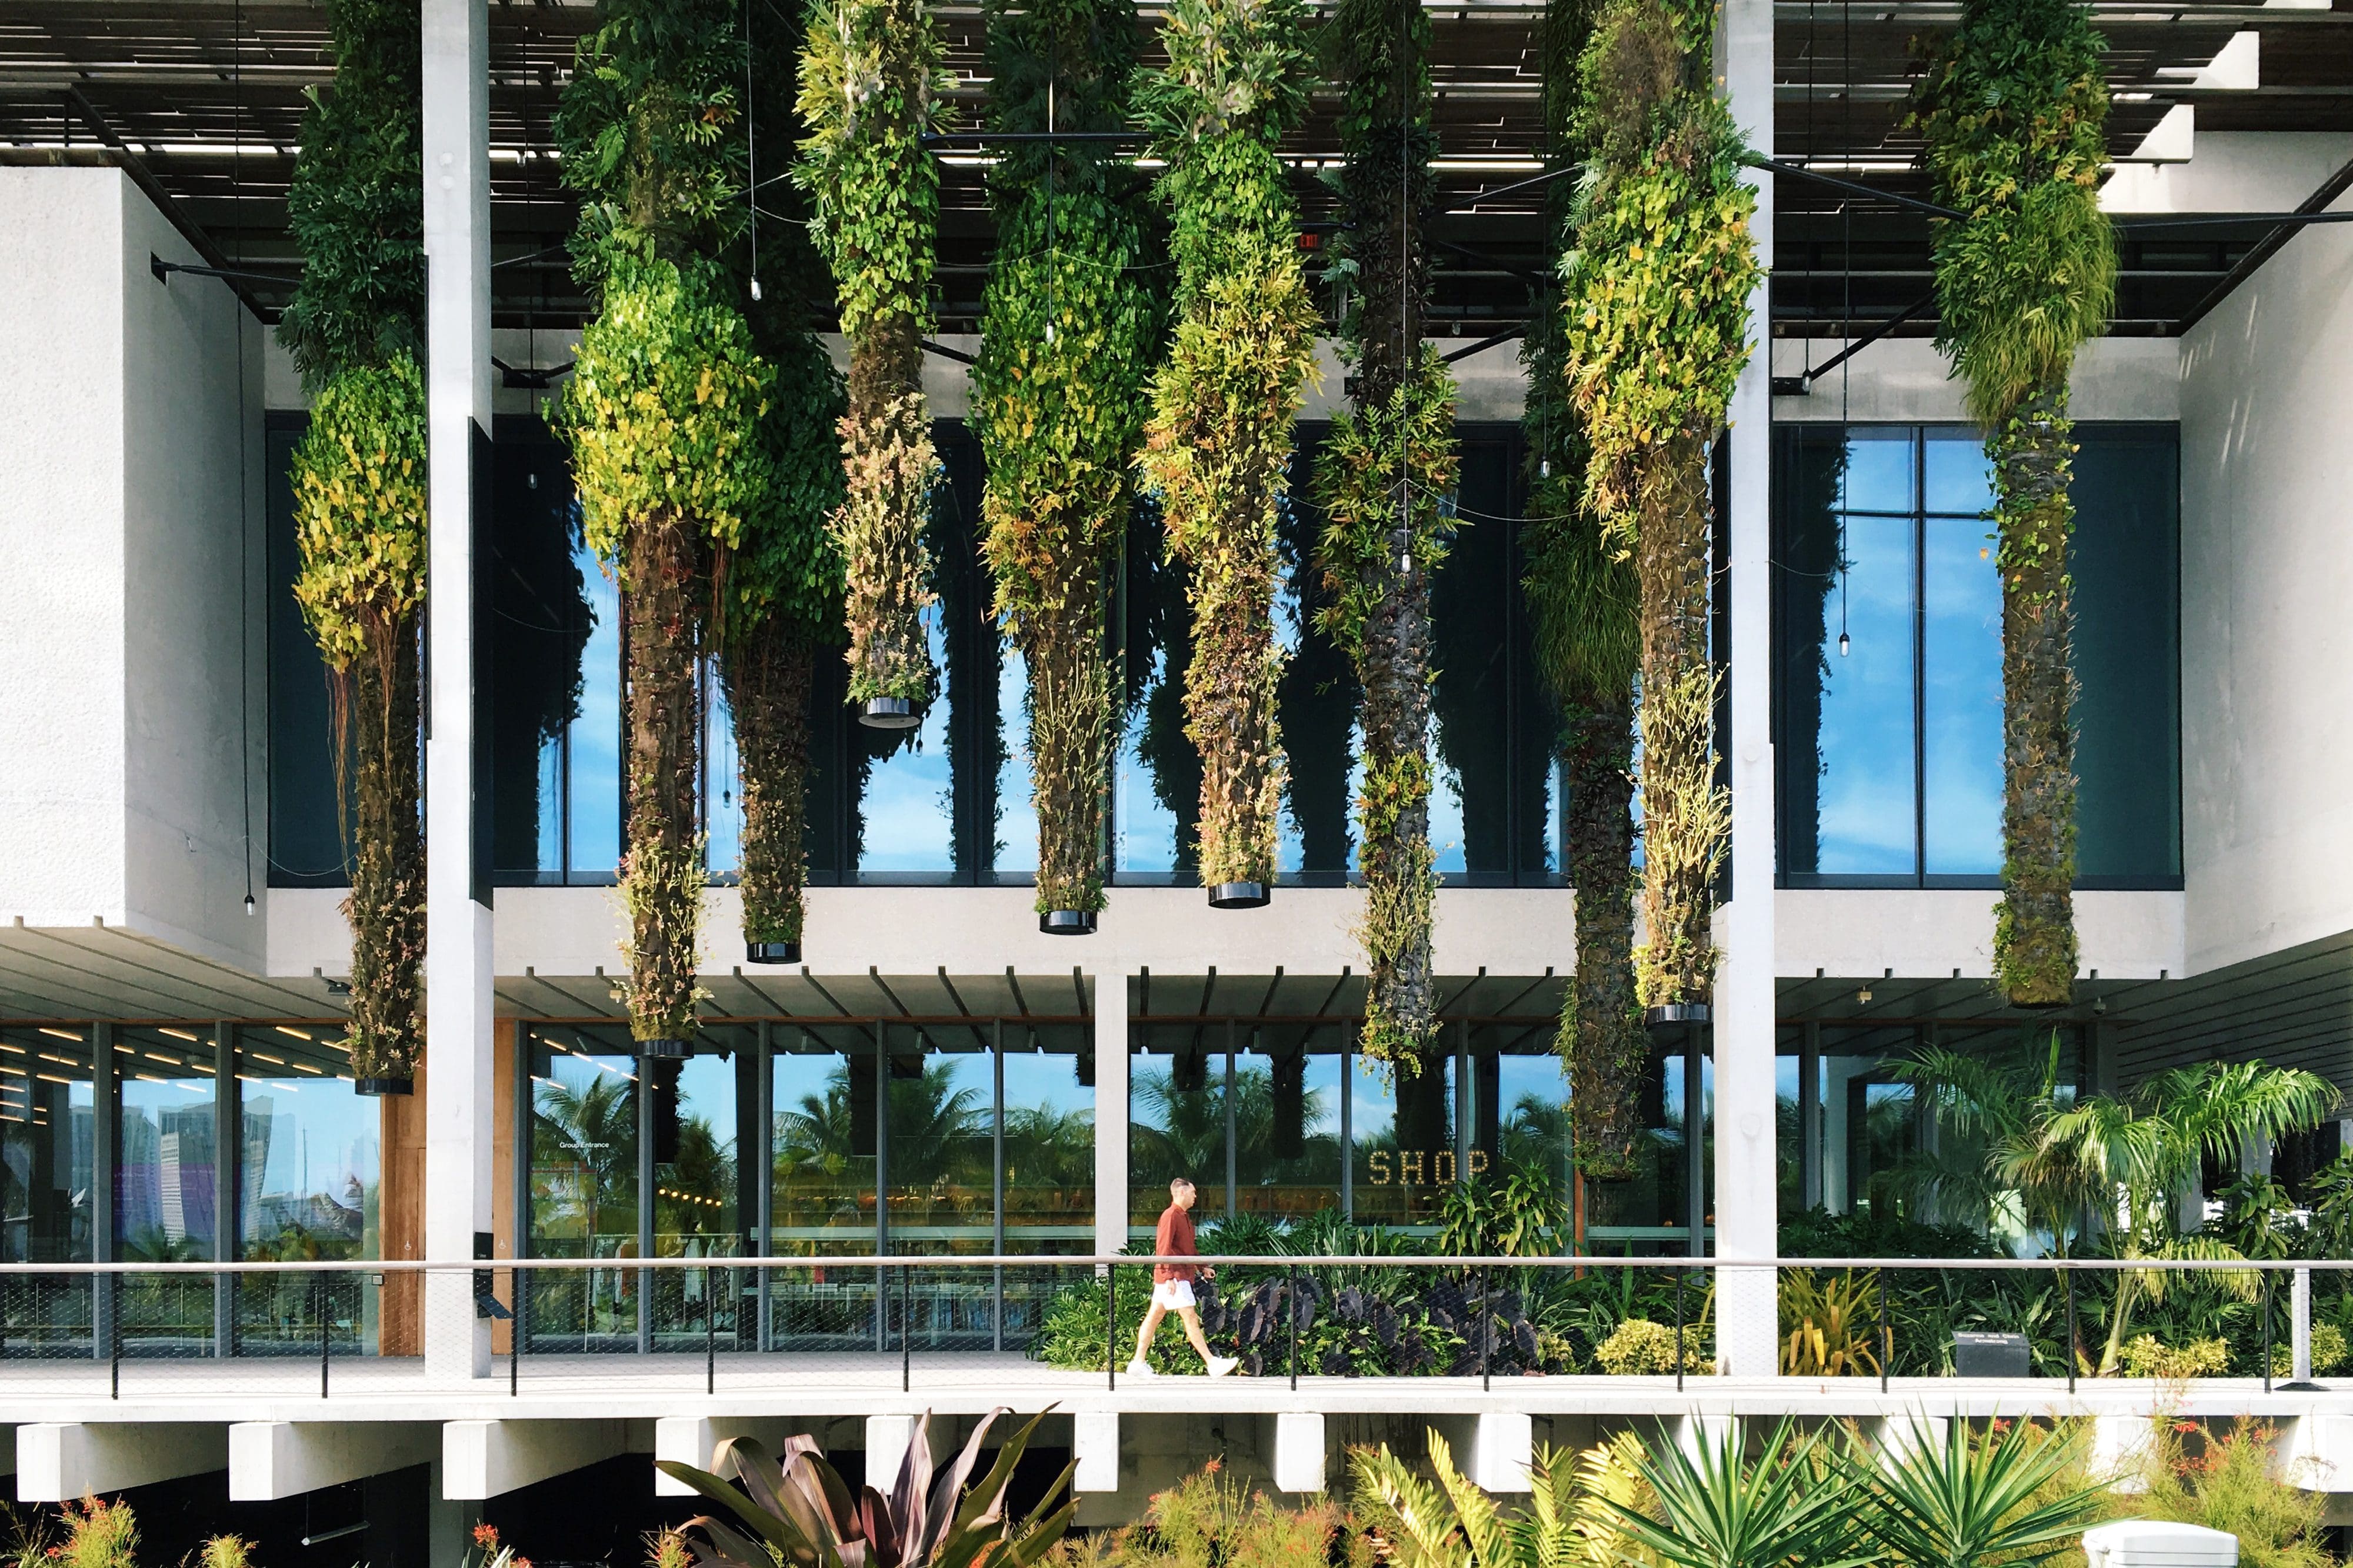 A man strolls beneath plants suspended from the overhanging roof at Perez Art Museum Miami